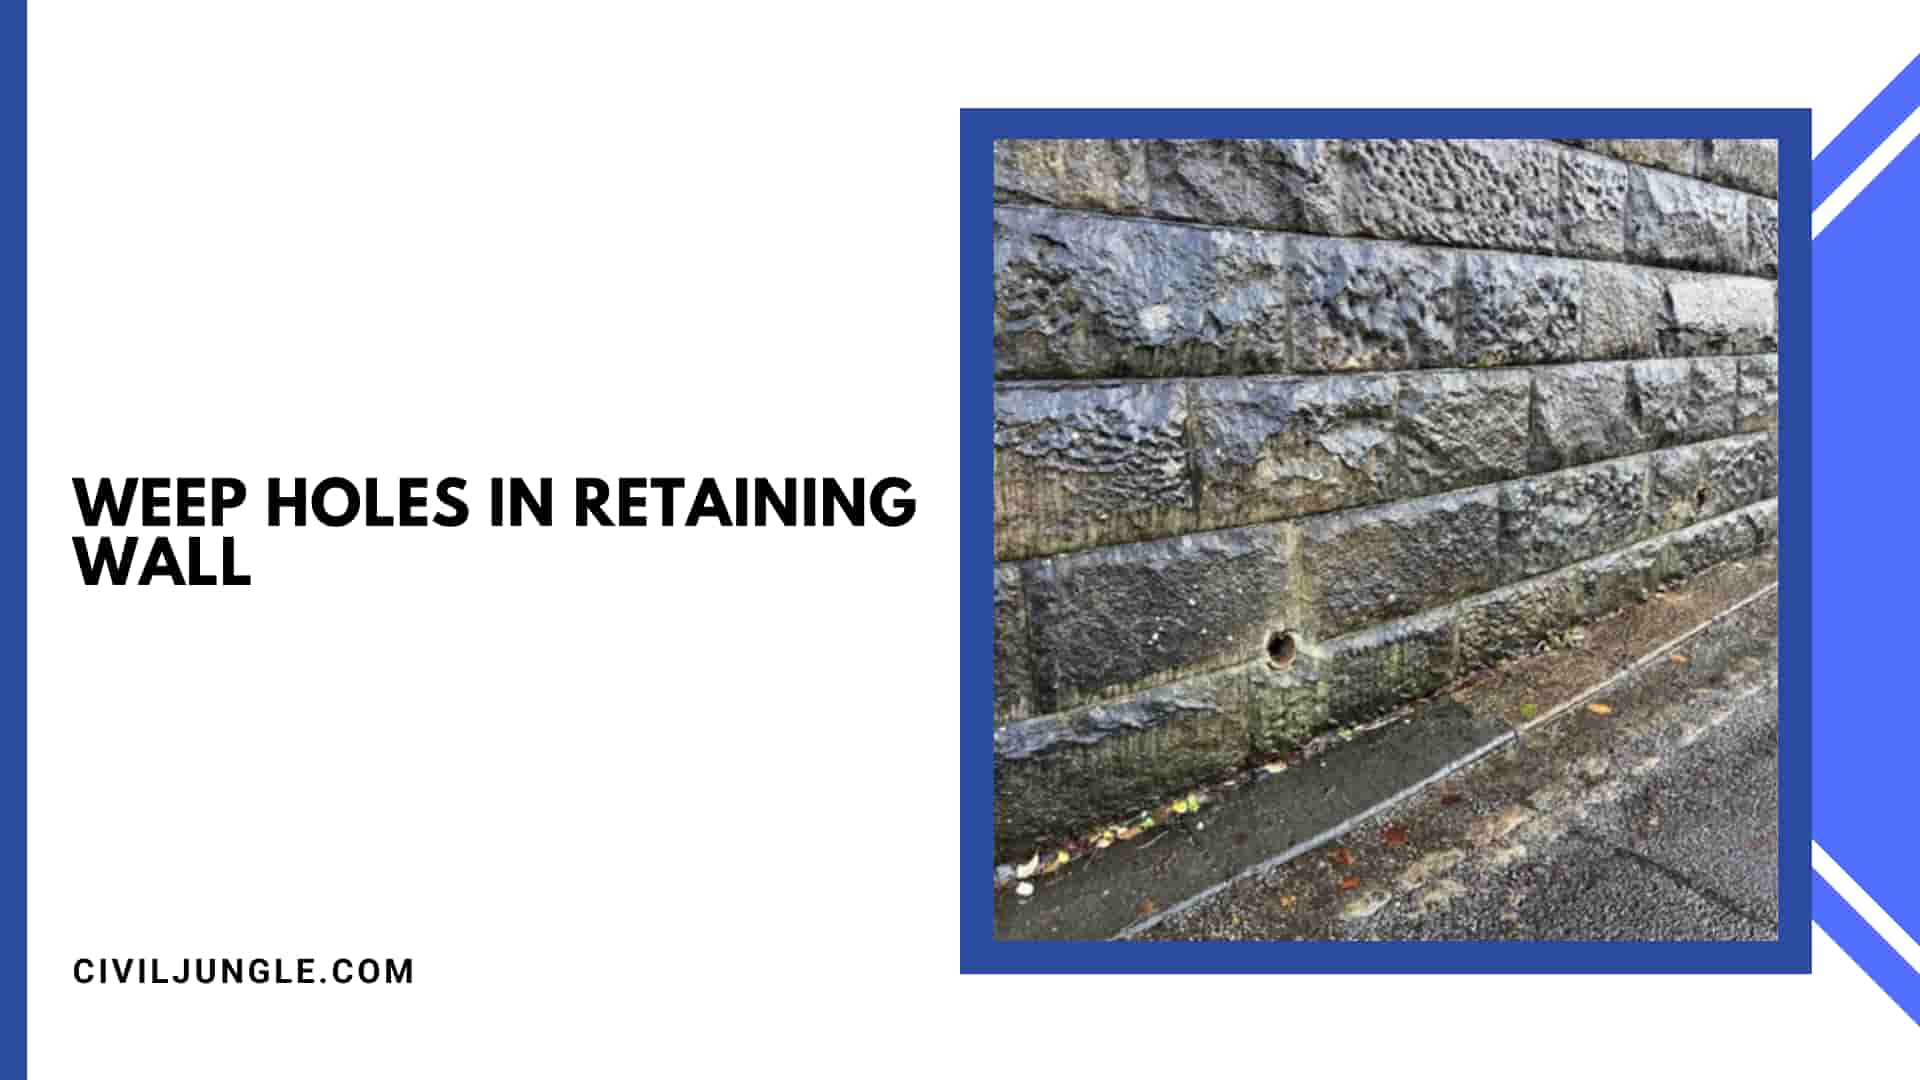 Weep Holes in Retaining Wall